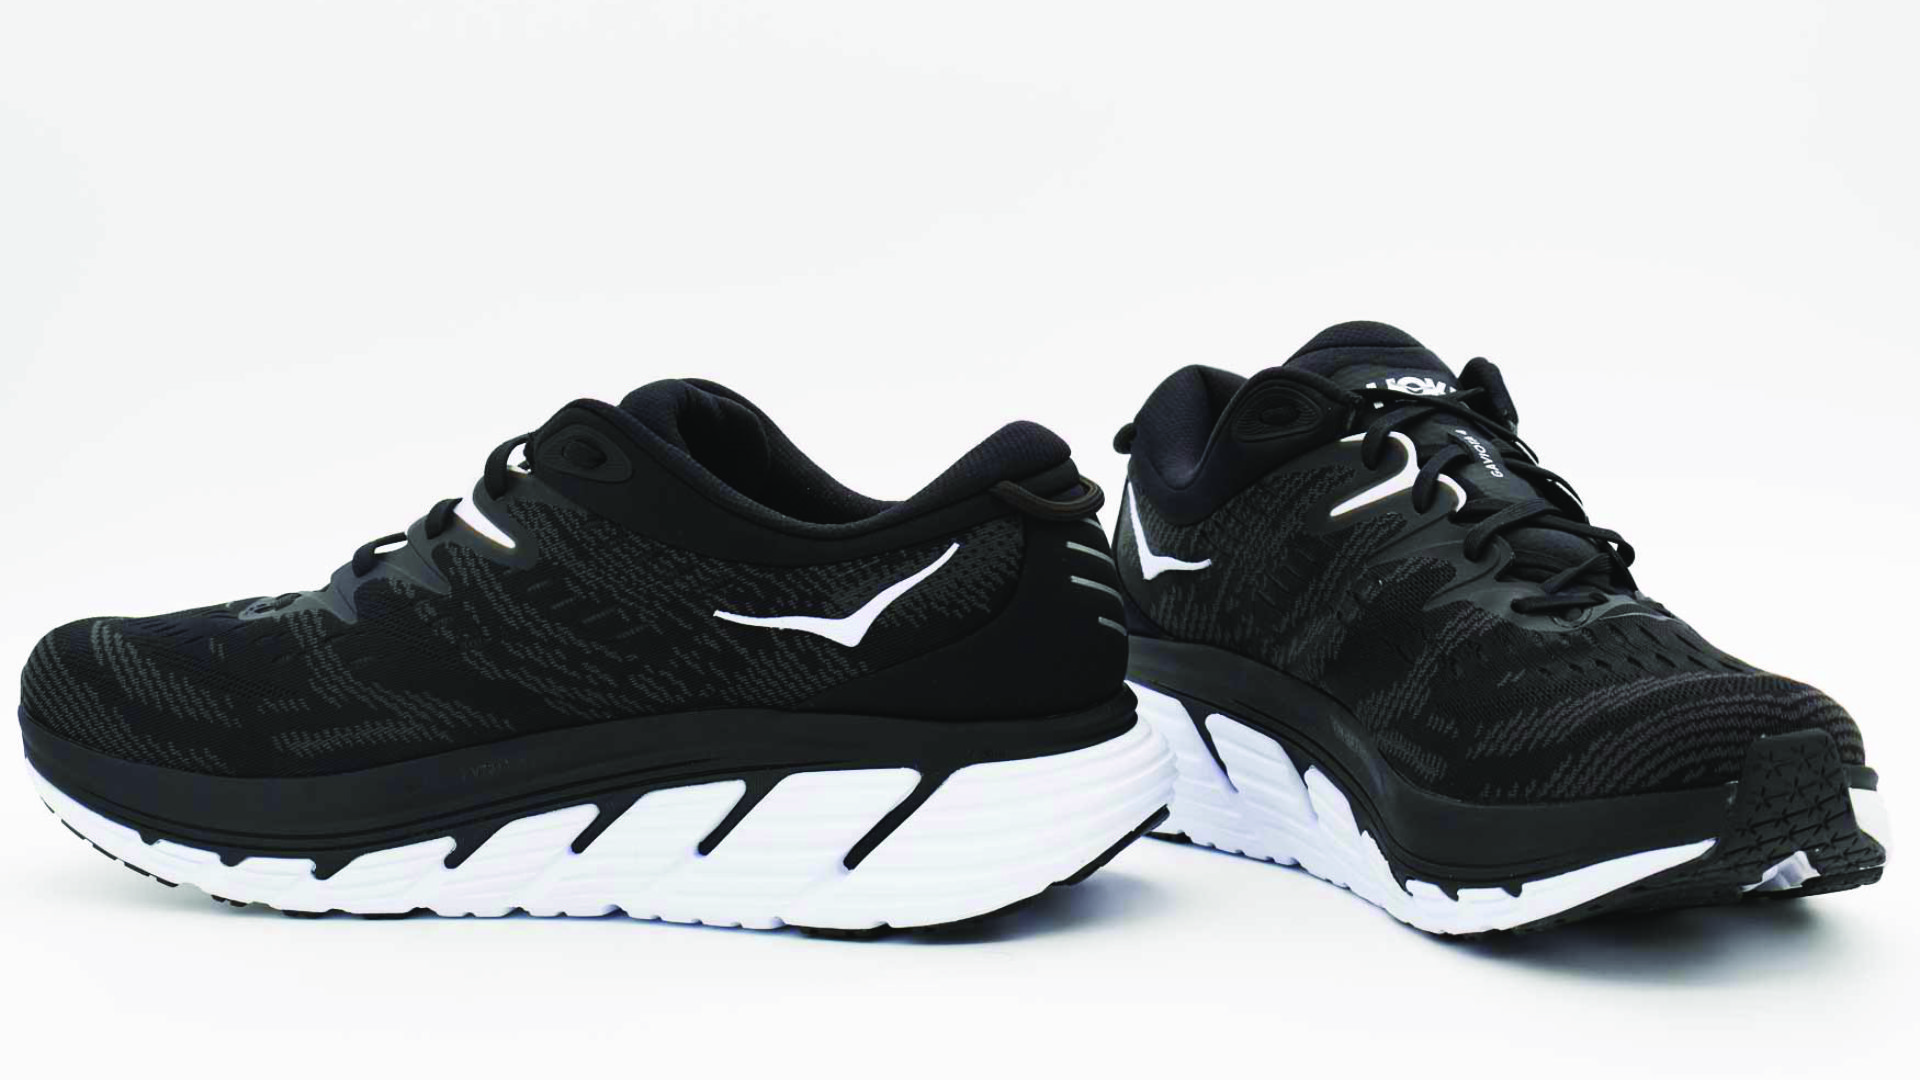 HOKA Gaviota 4 in black/white colourway - footwear that can help ease your achilles tendonitis pain. 